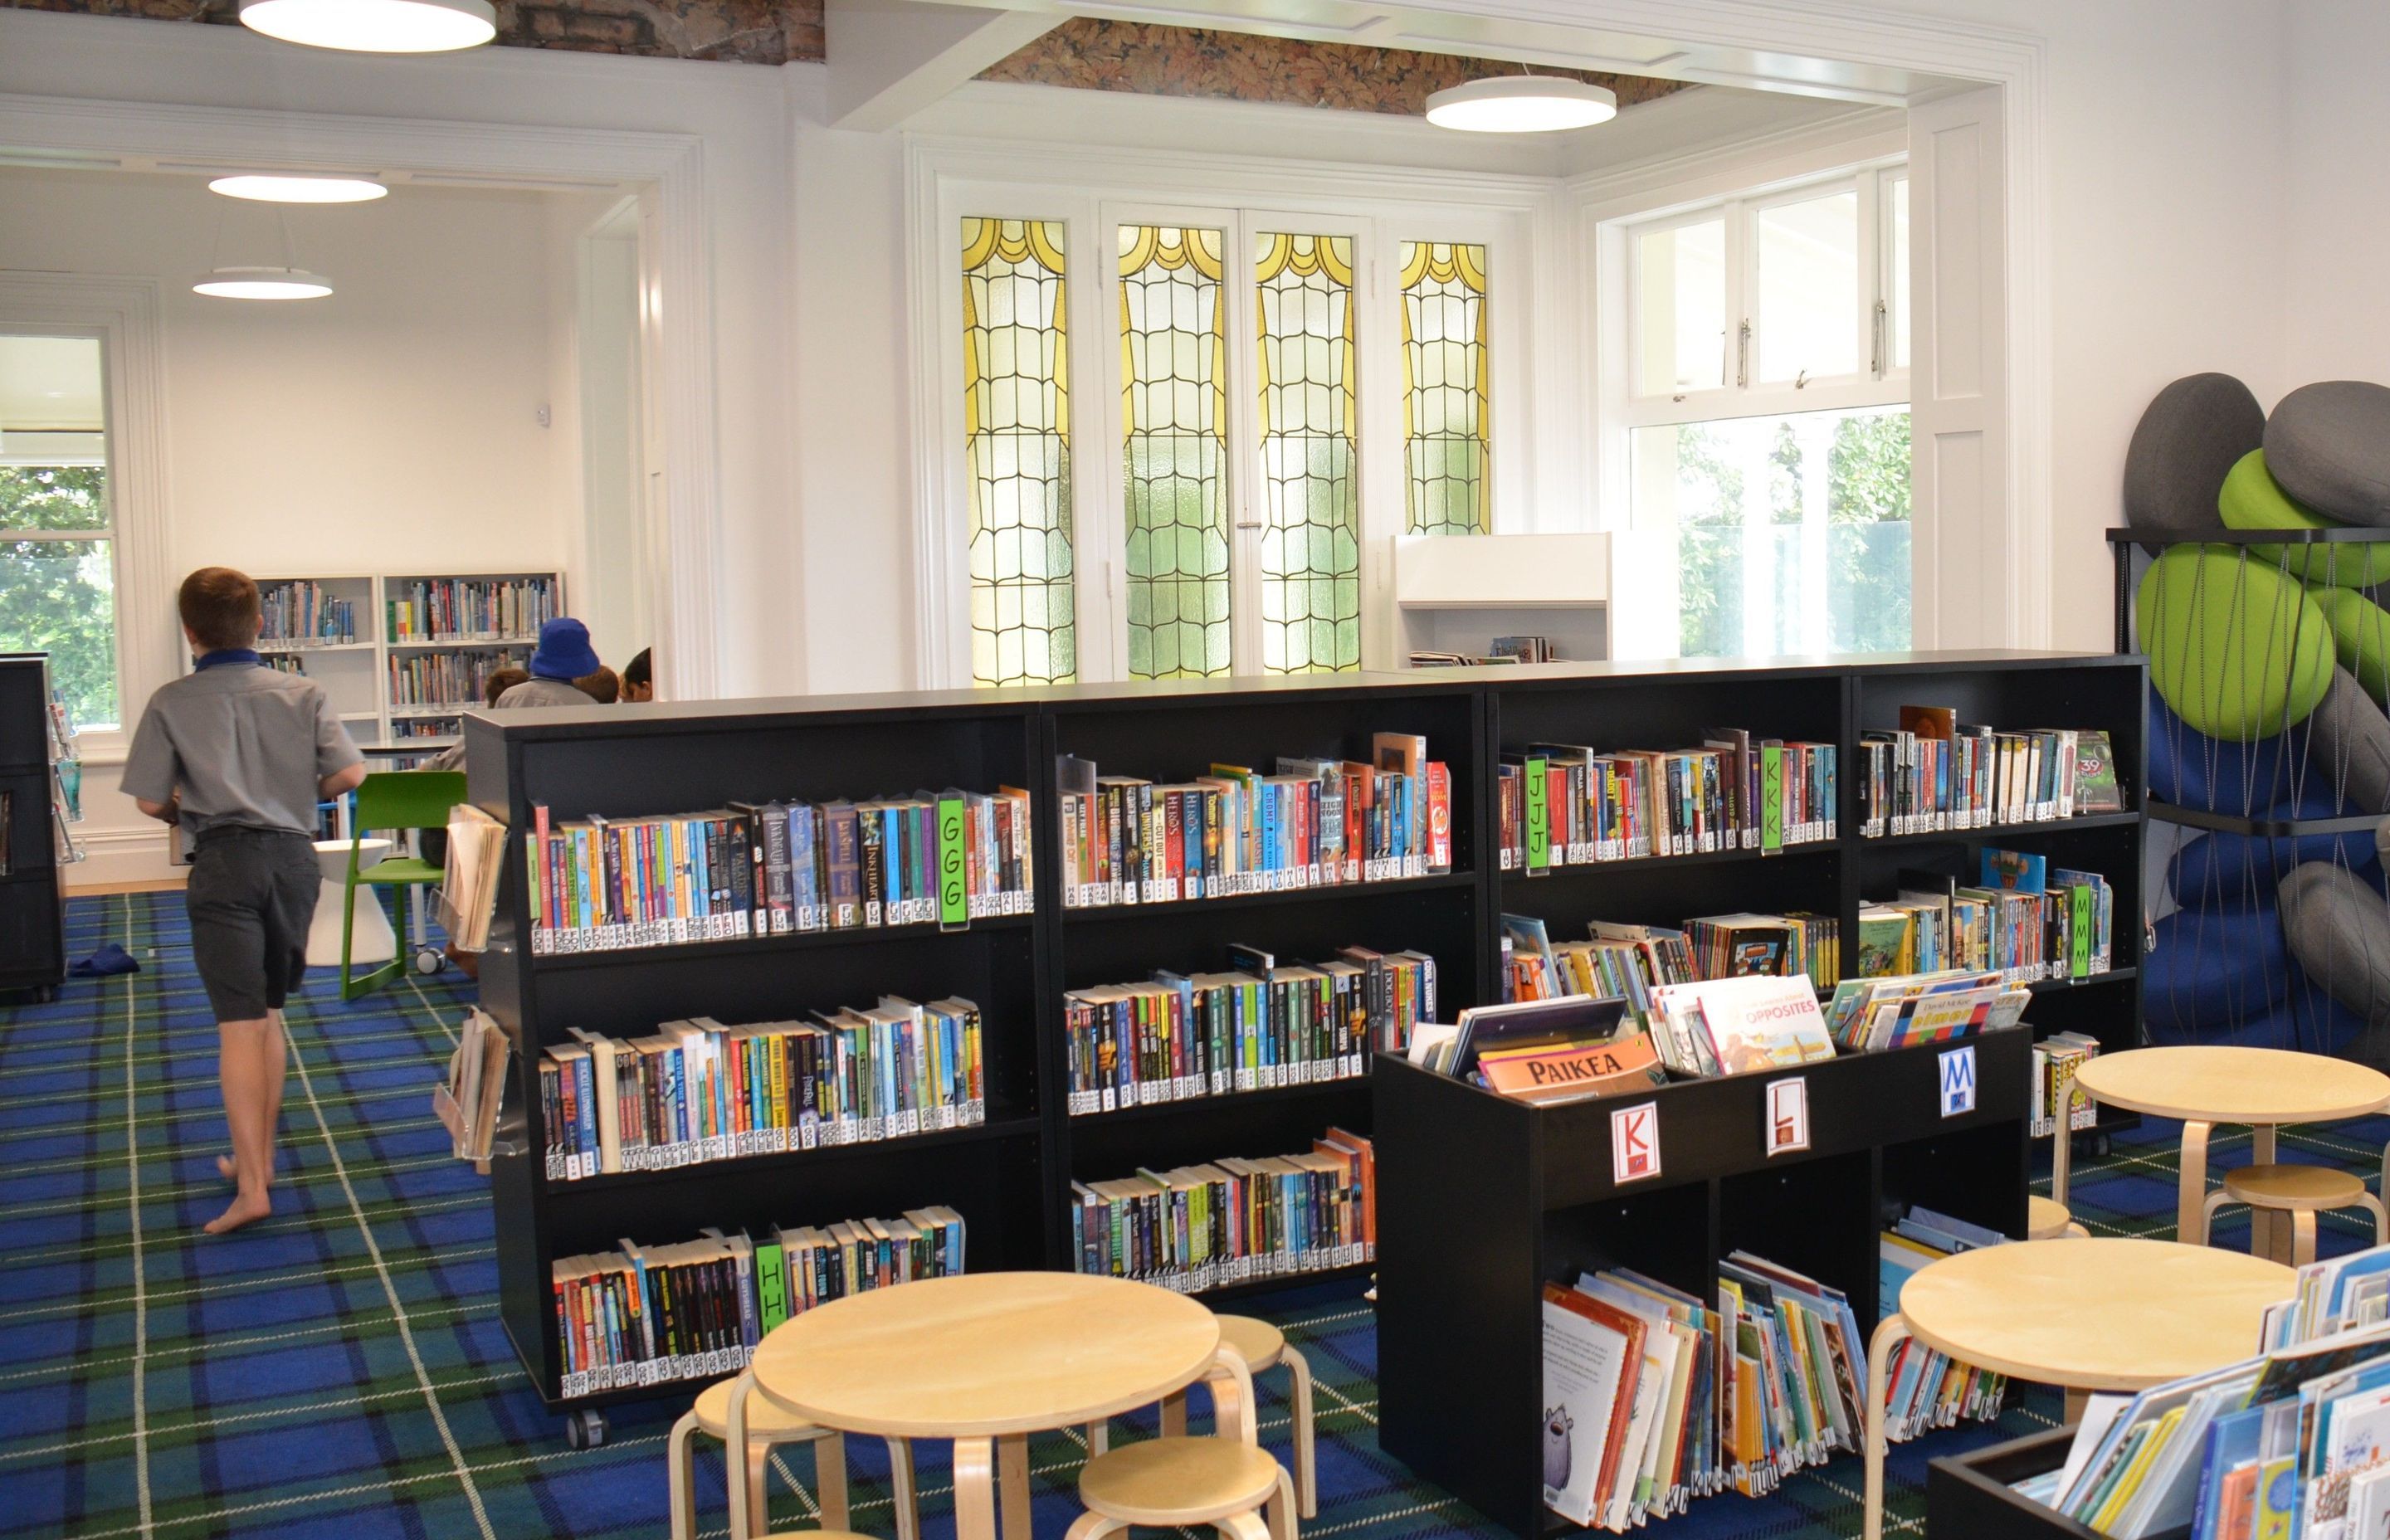 Book shelving can be moved around the heritage space, which retains the stately cornices and stained glass windows.